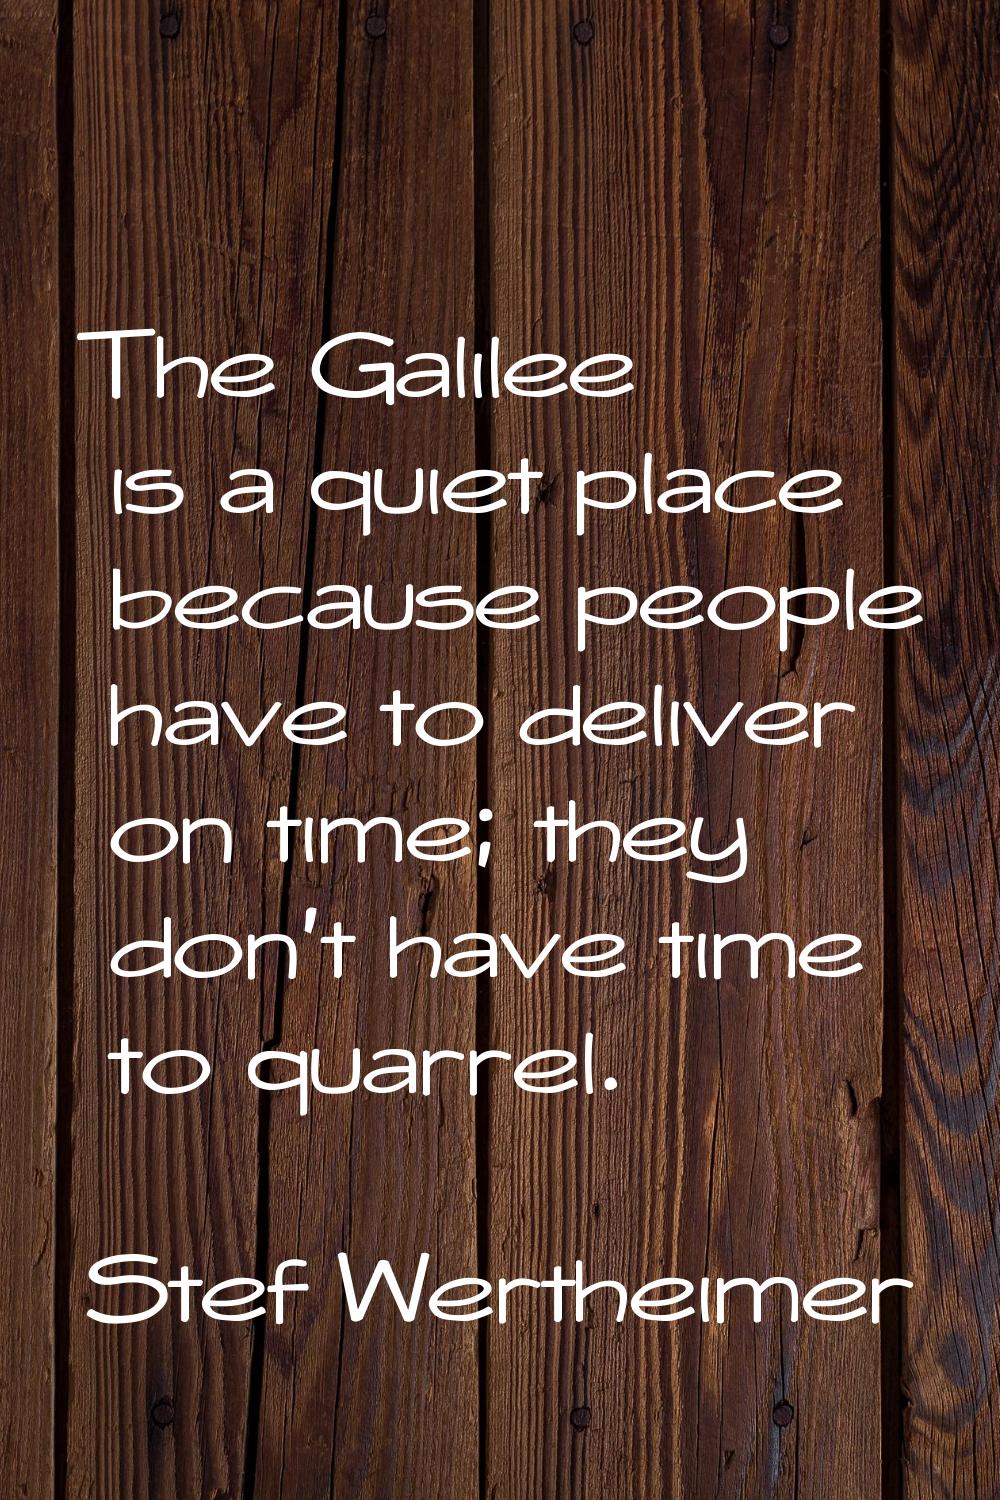 The Galilee is a quiet place because people have to deliver on time; they don't have time to quarre